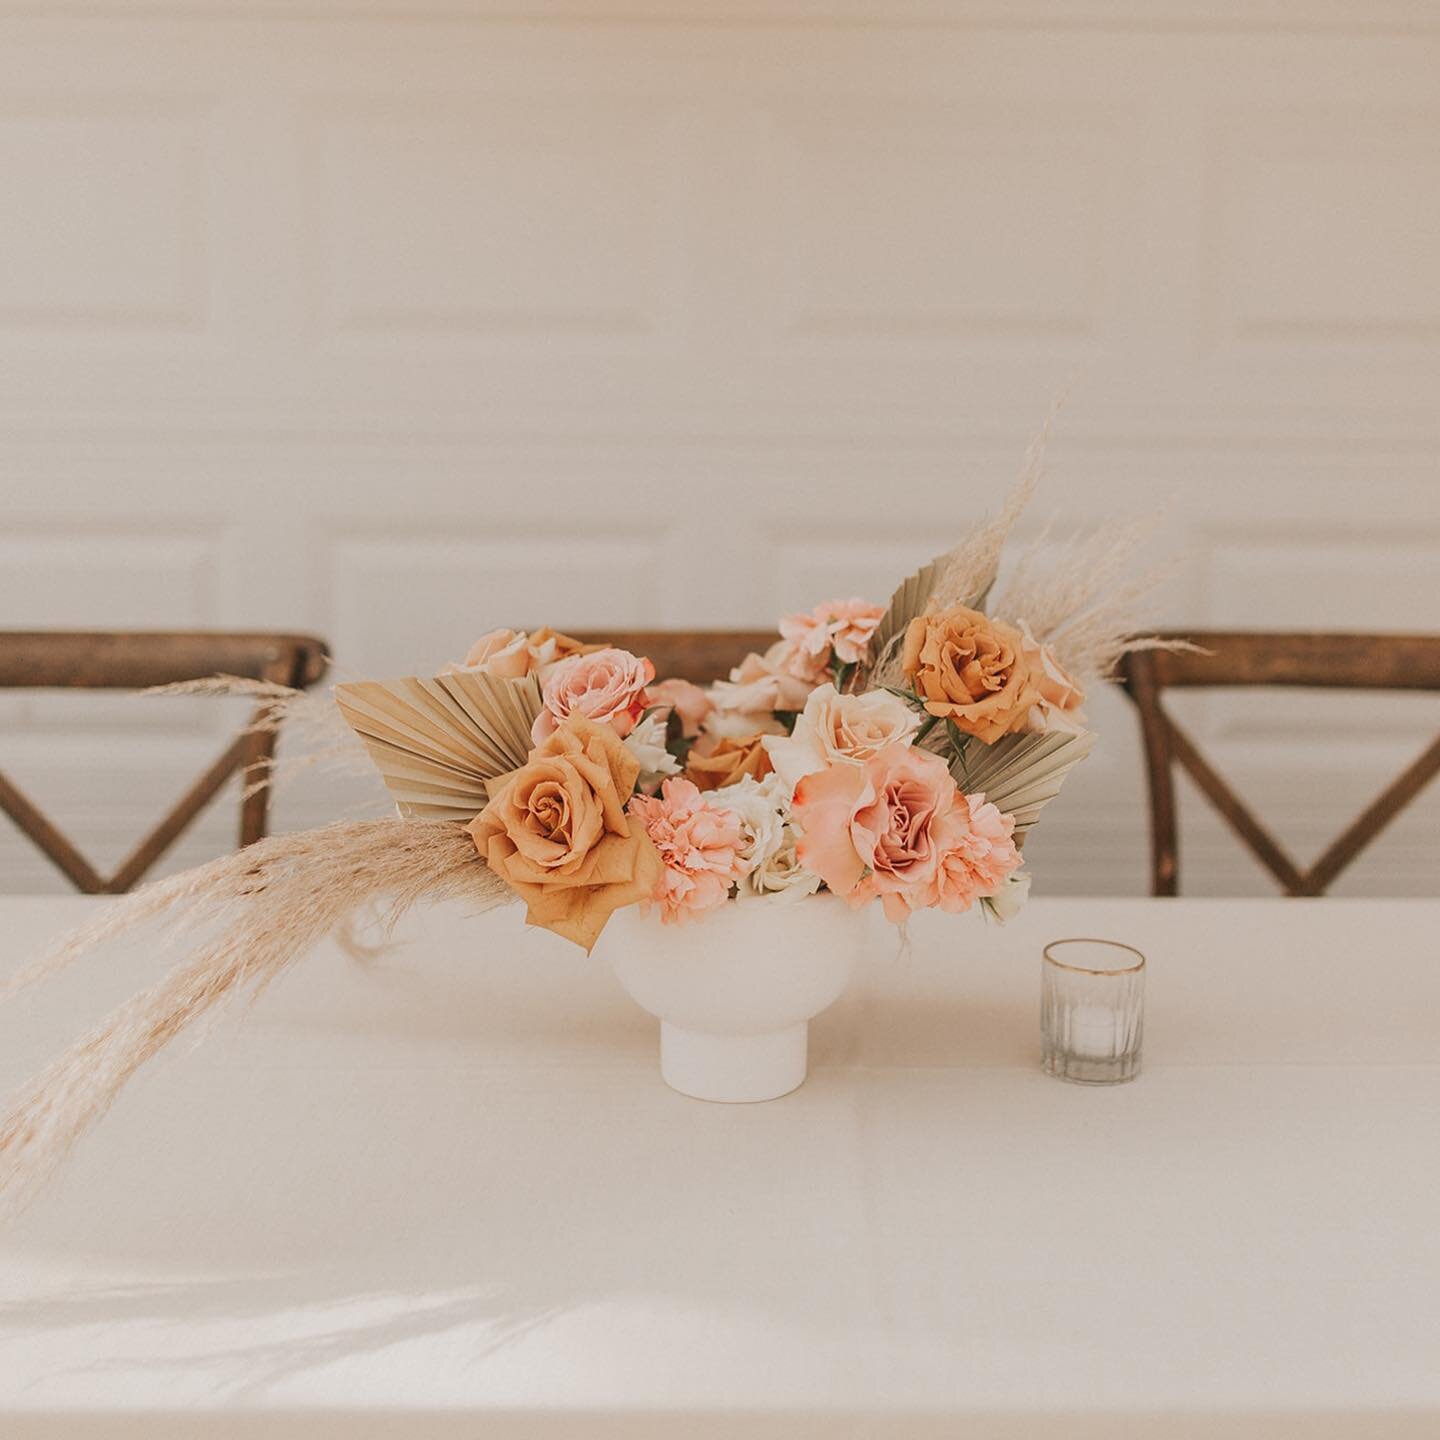 One of my fav rose combos - Toffee, Cappuccino, + Quicksand roses paired with dried pampas and palm 😍🧡Sounds delish too 😋